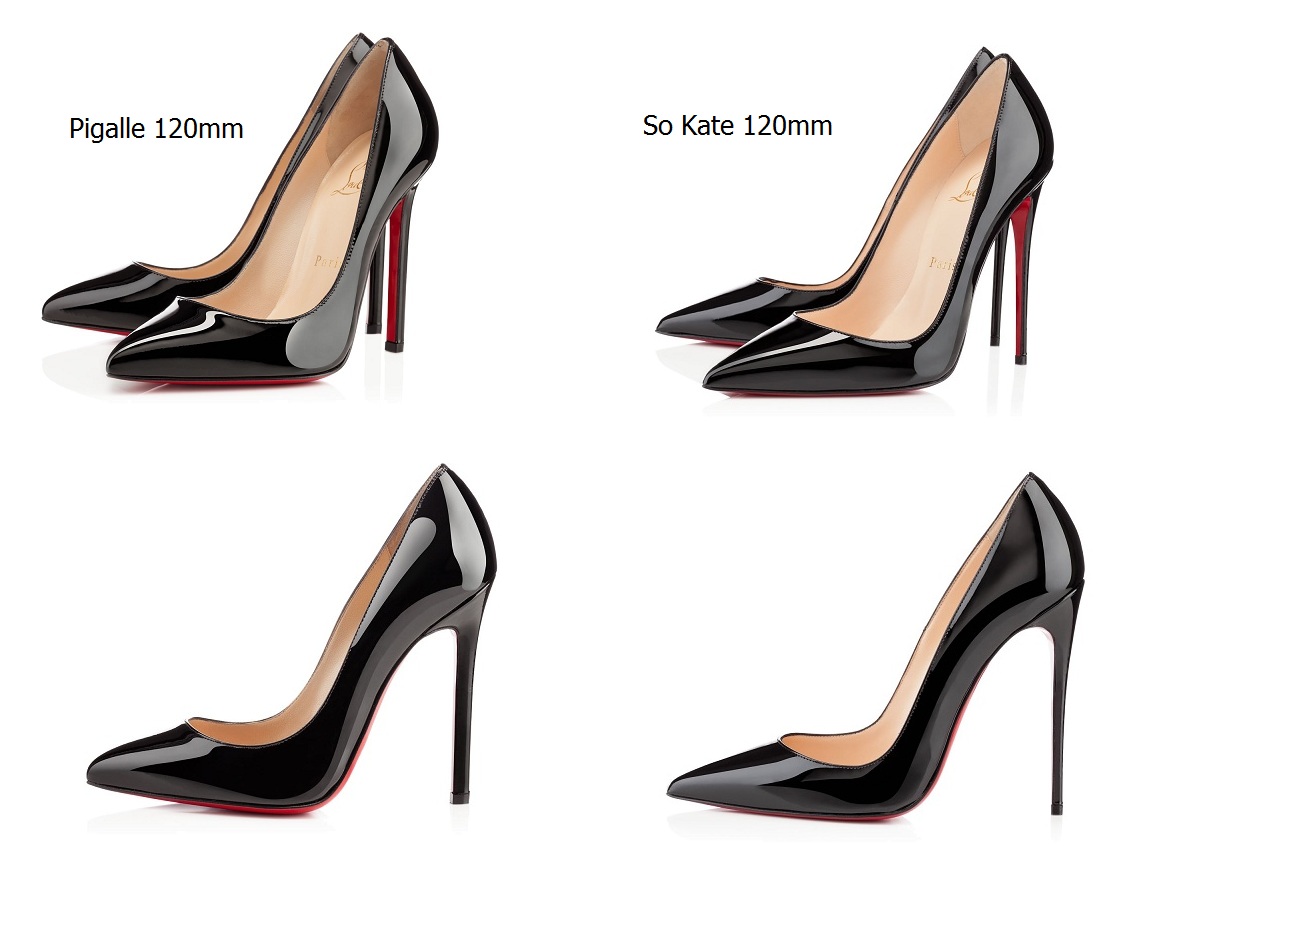 Christian Louboutin Pigalle 120mm vs. So Kate 120mm - Lust4Labels